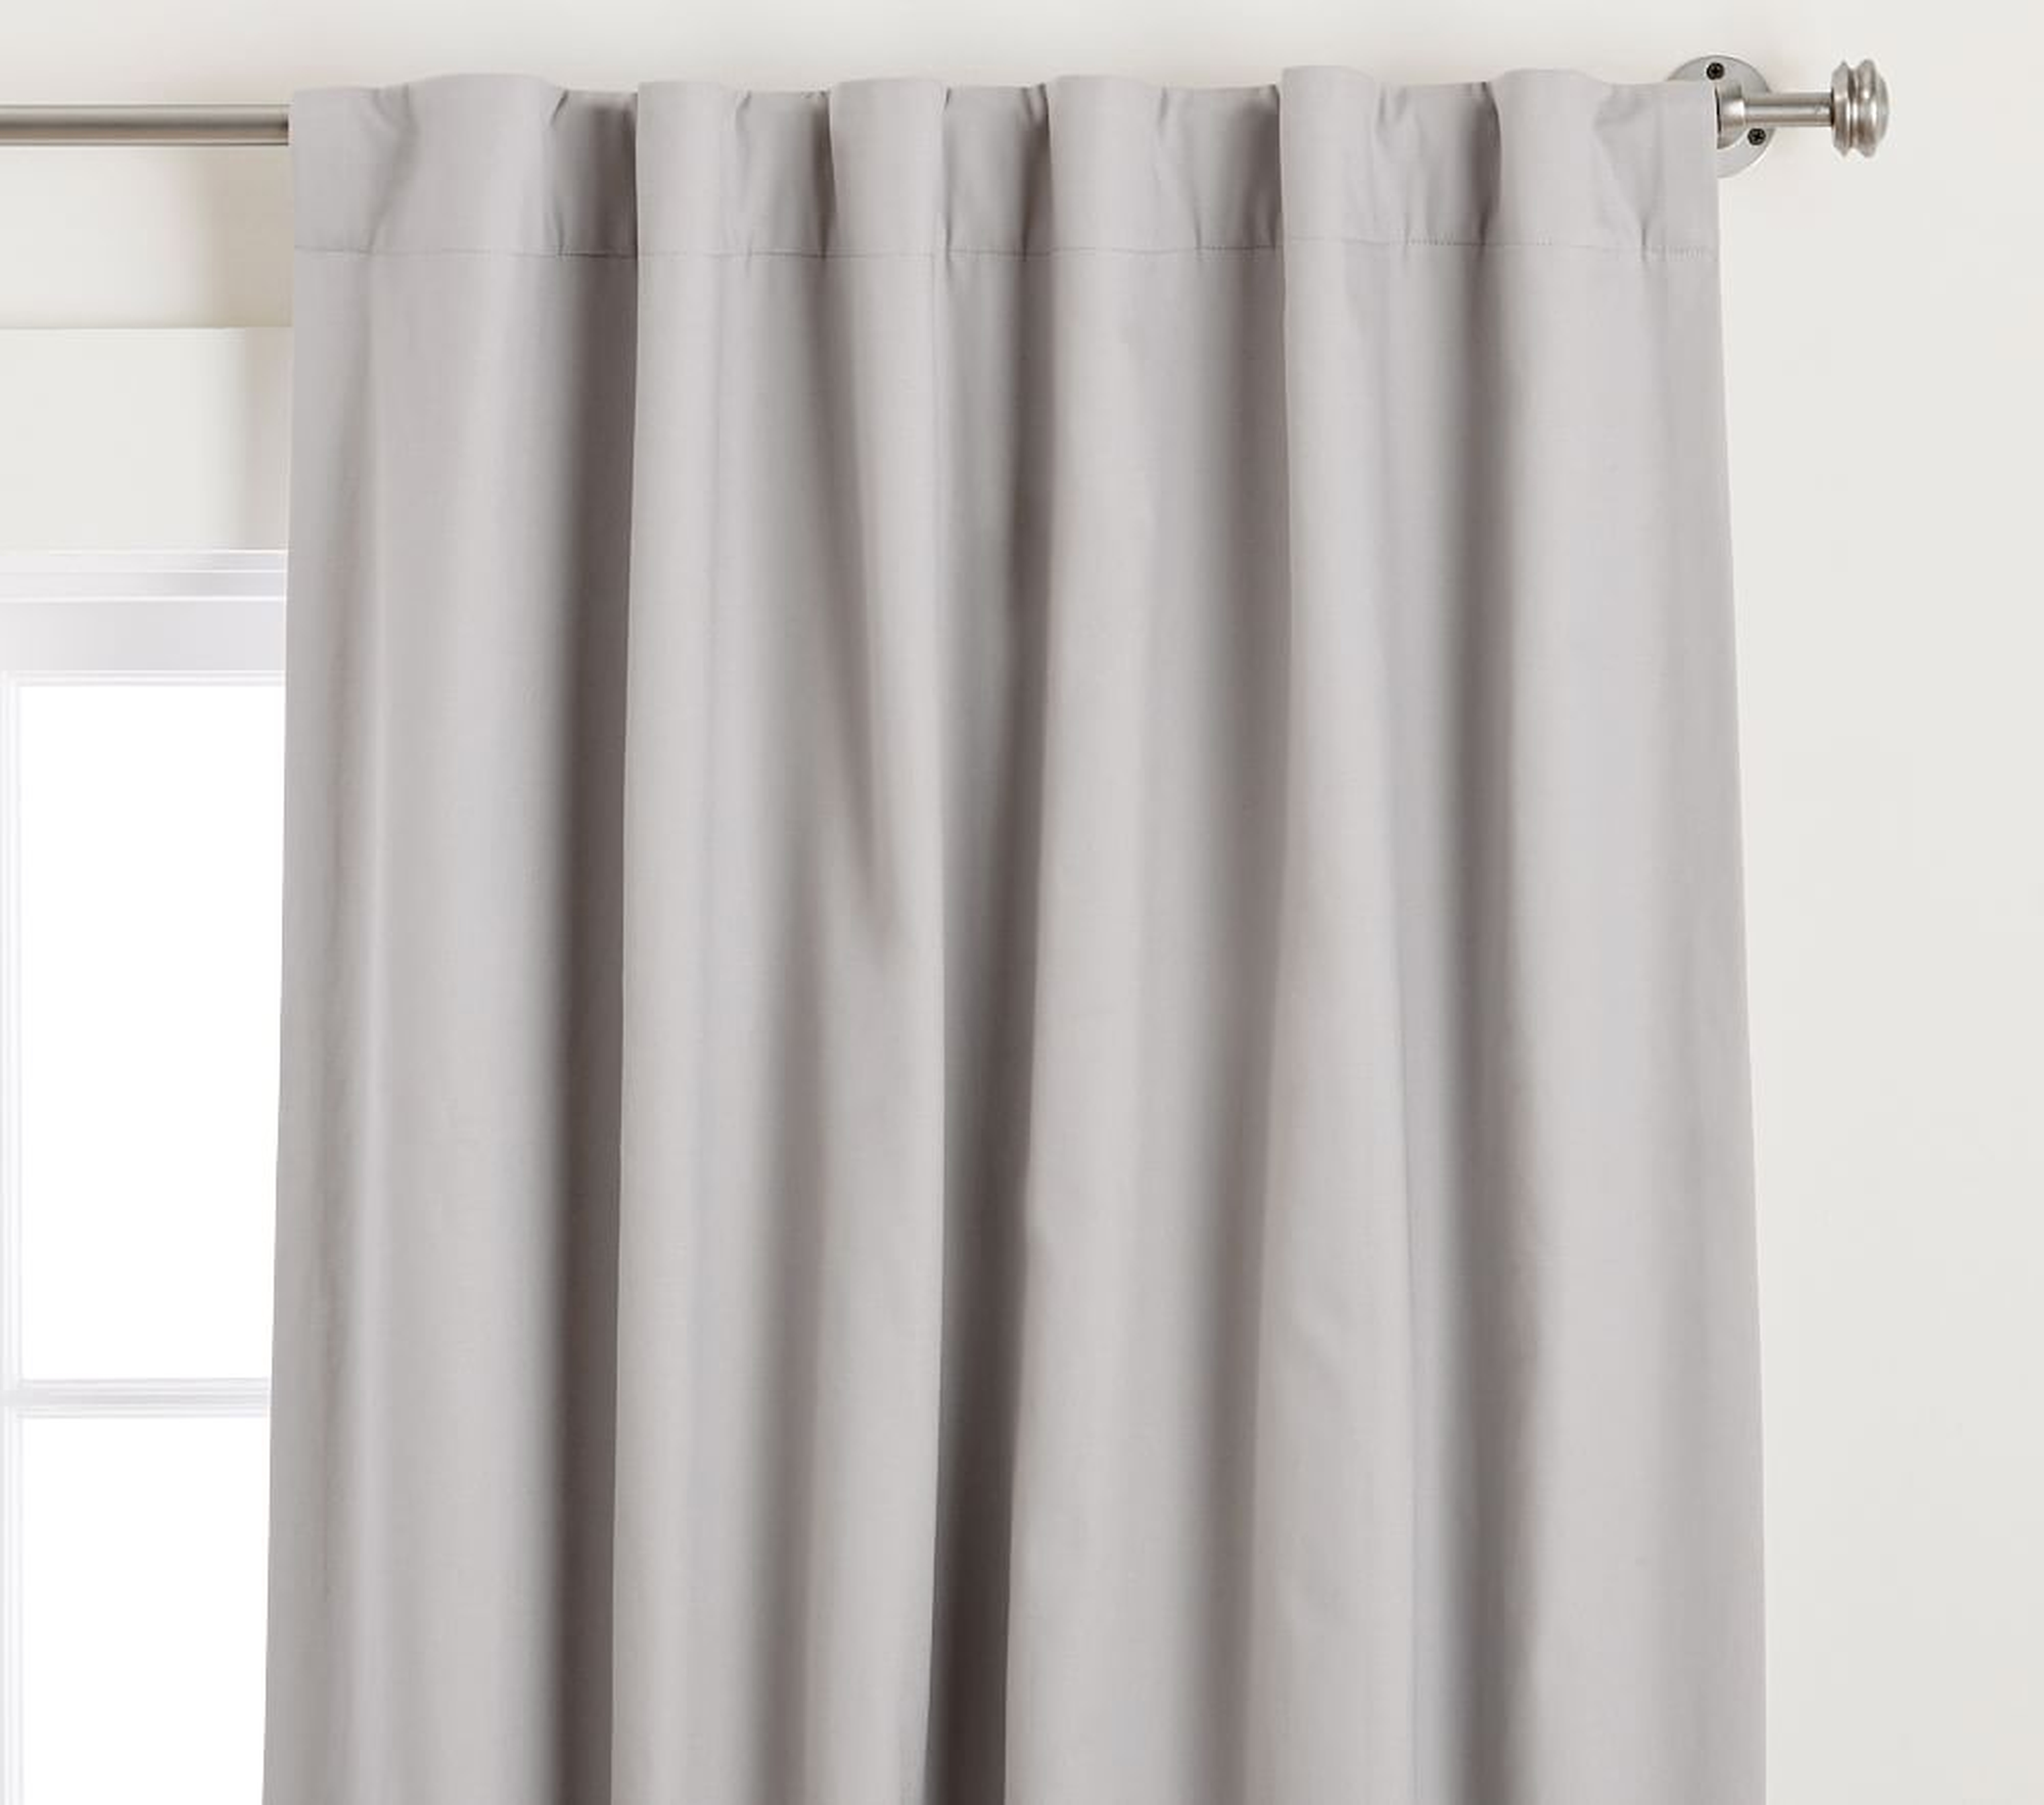 Soothing Sleep Noise Reducing Blackout Curtain, 96 Inches, Gray - Pottery Barn Kids